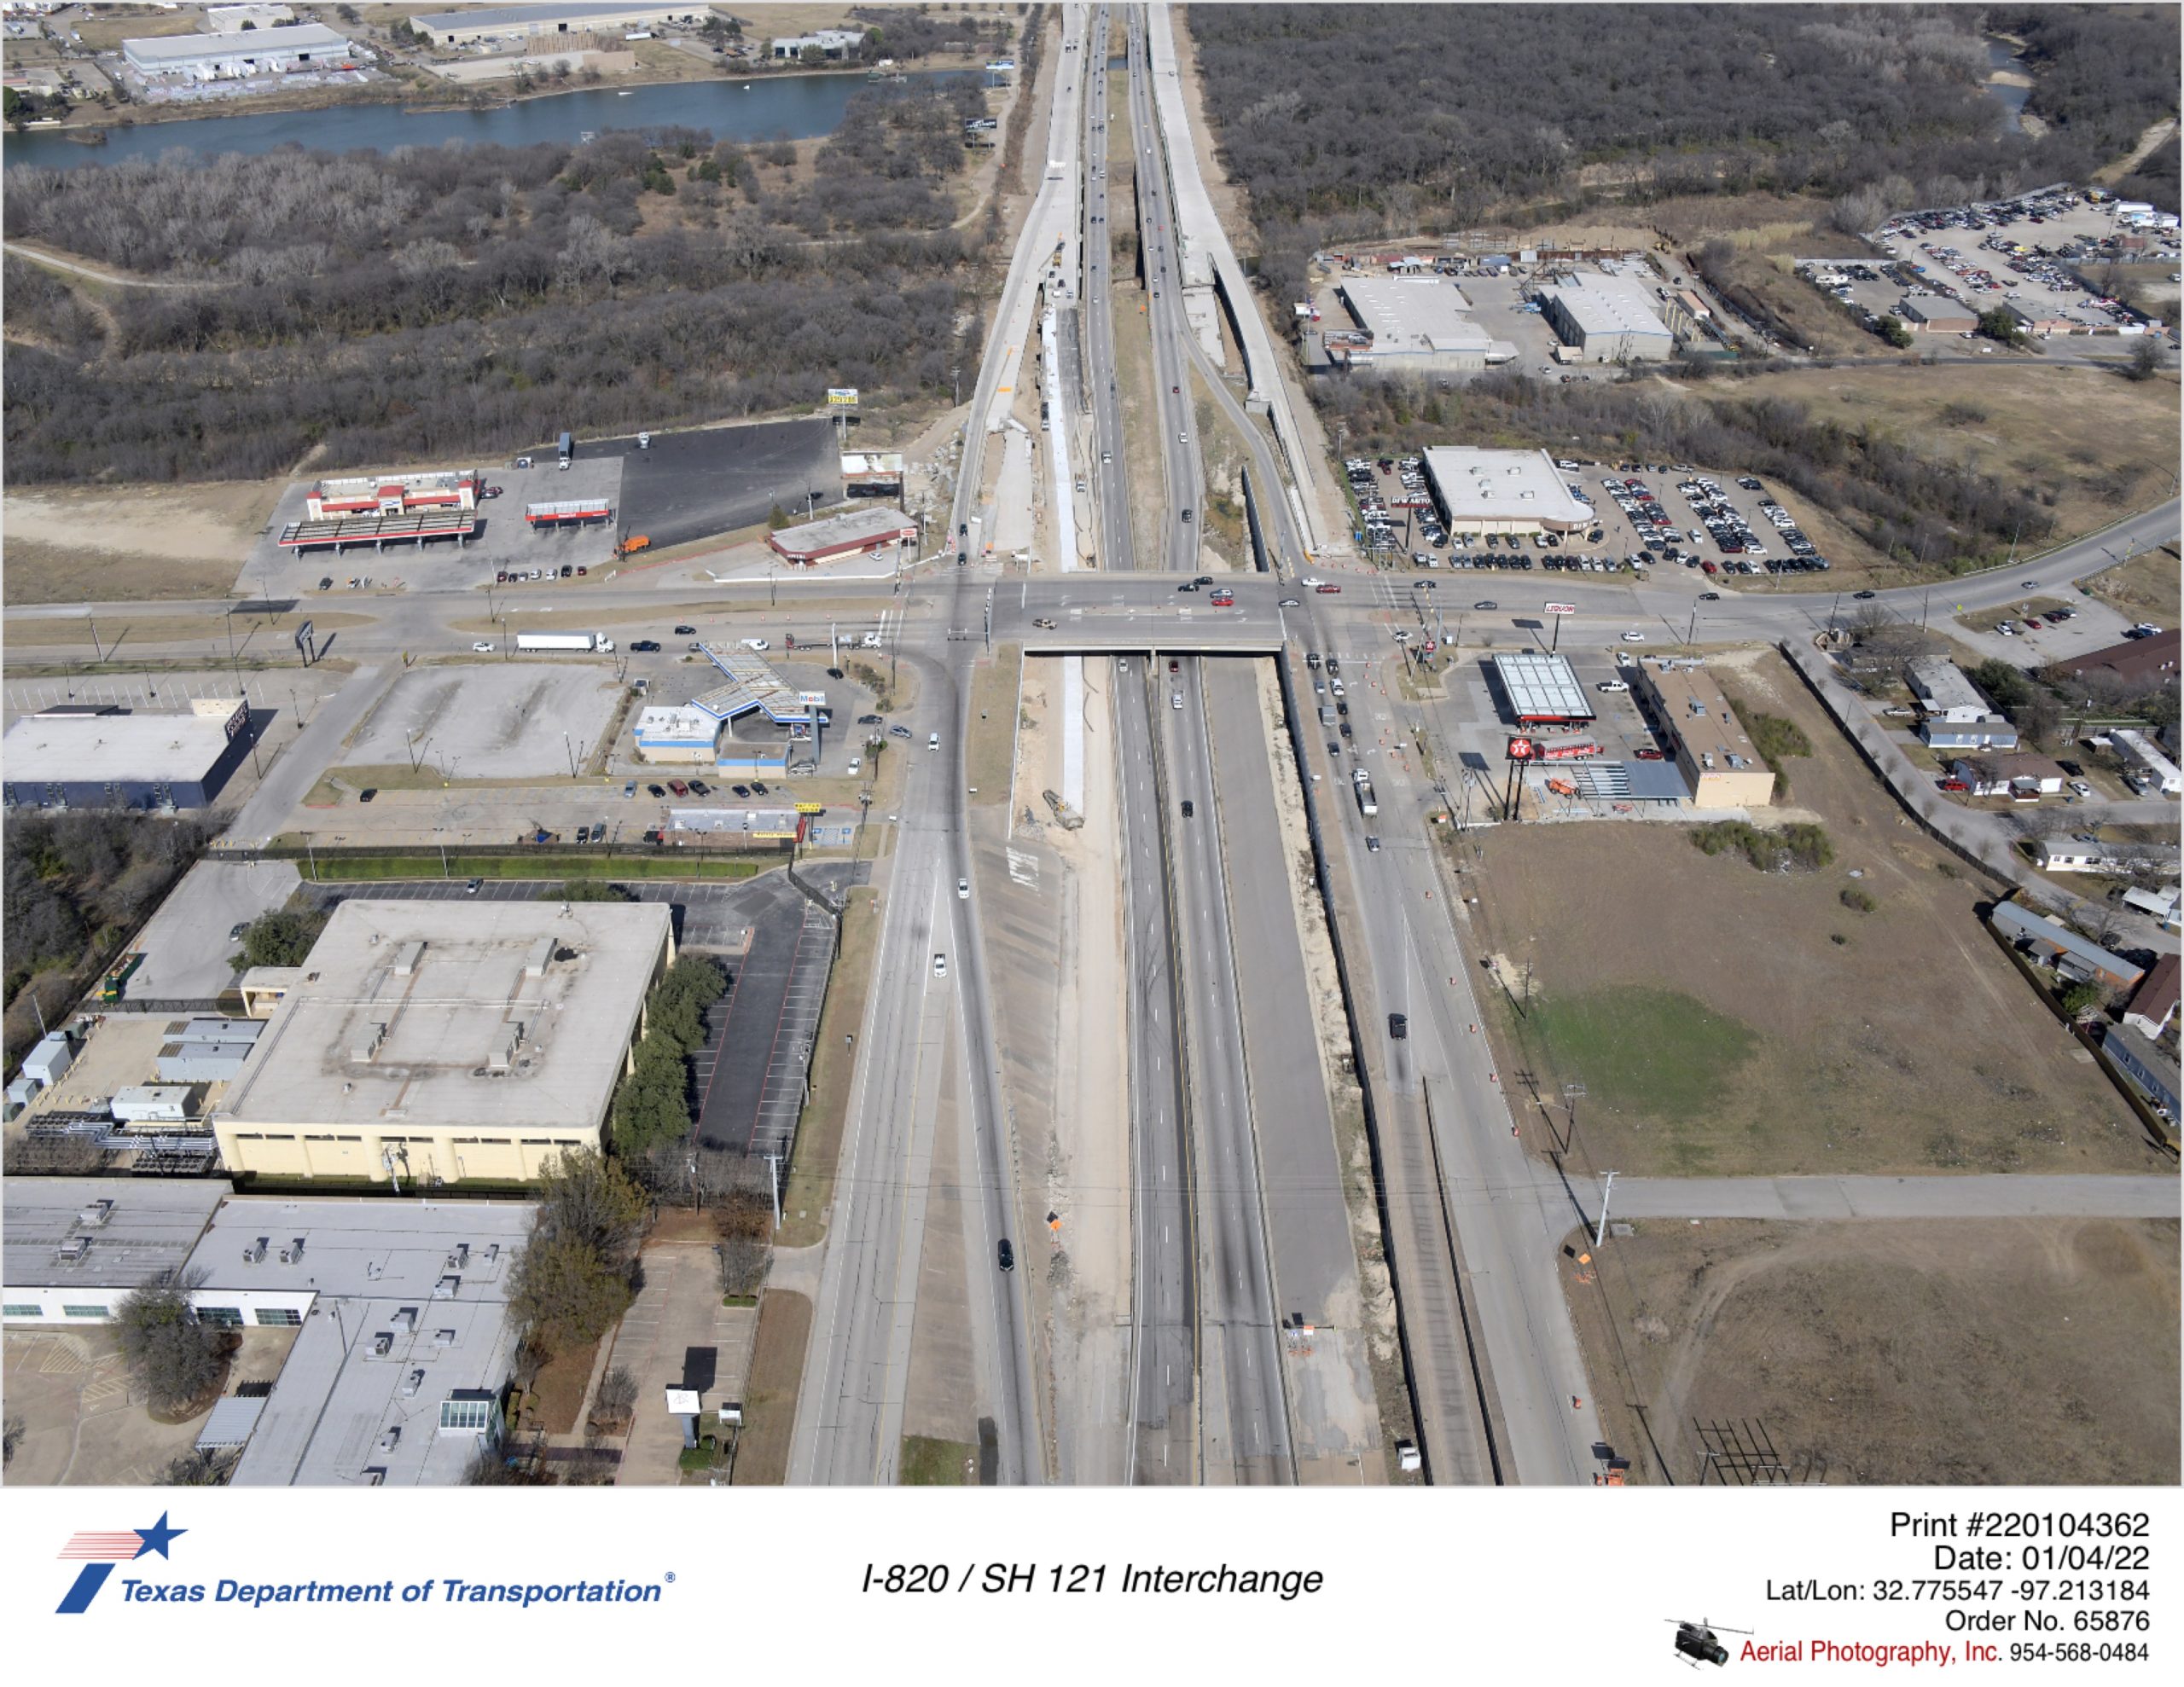 I-820 looking north at Randol Mill Rd interchange. Construction of new pavement and bridges north of Randol Mill Rd shown. Pavement construction shown for southbound traffic passing under Randol Mill Rd.